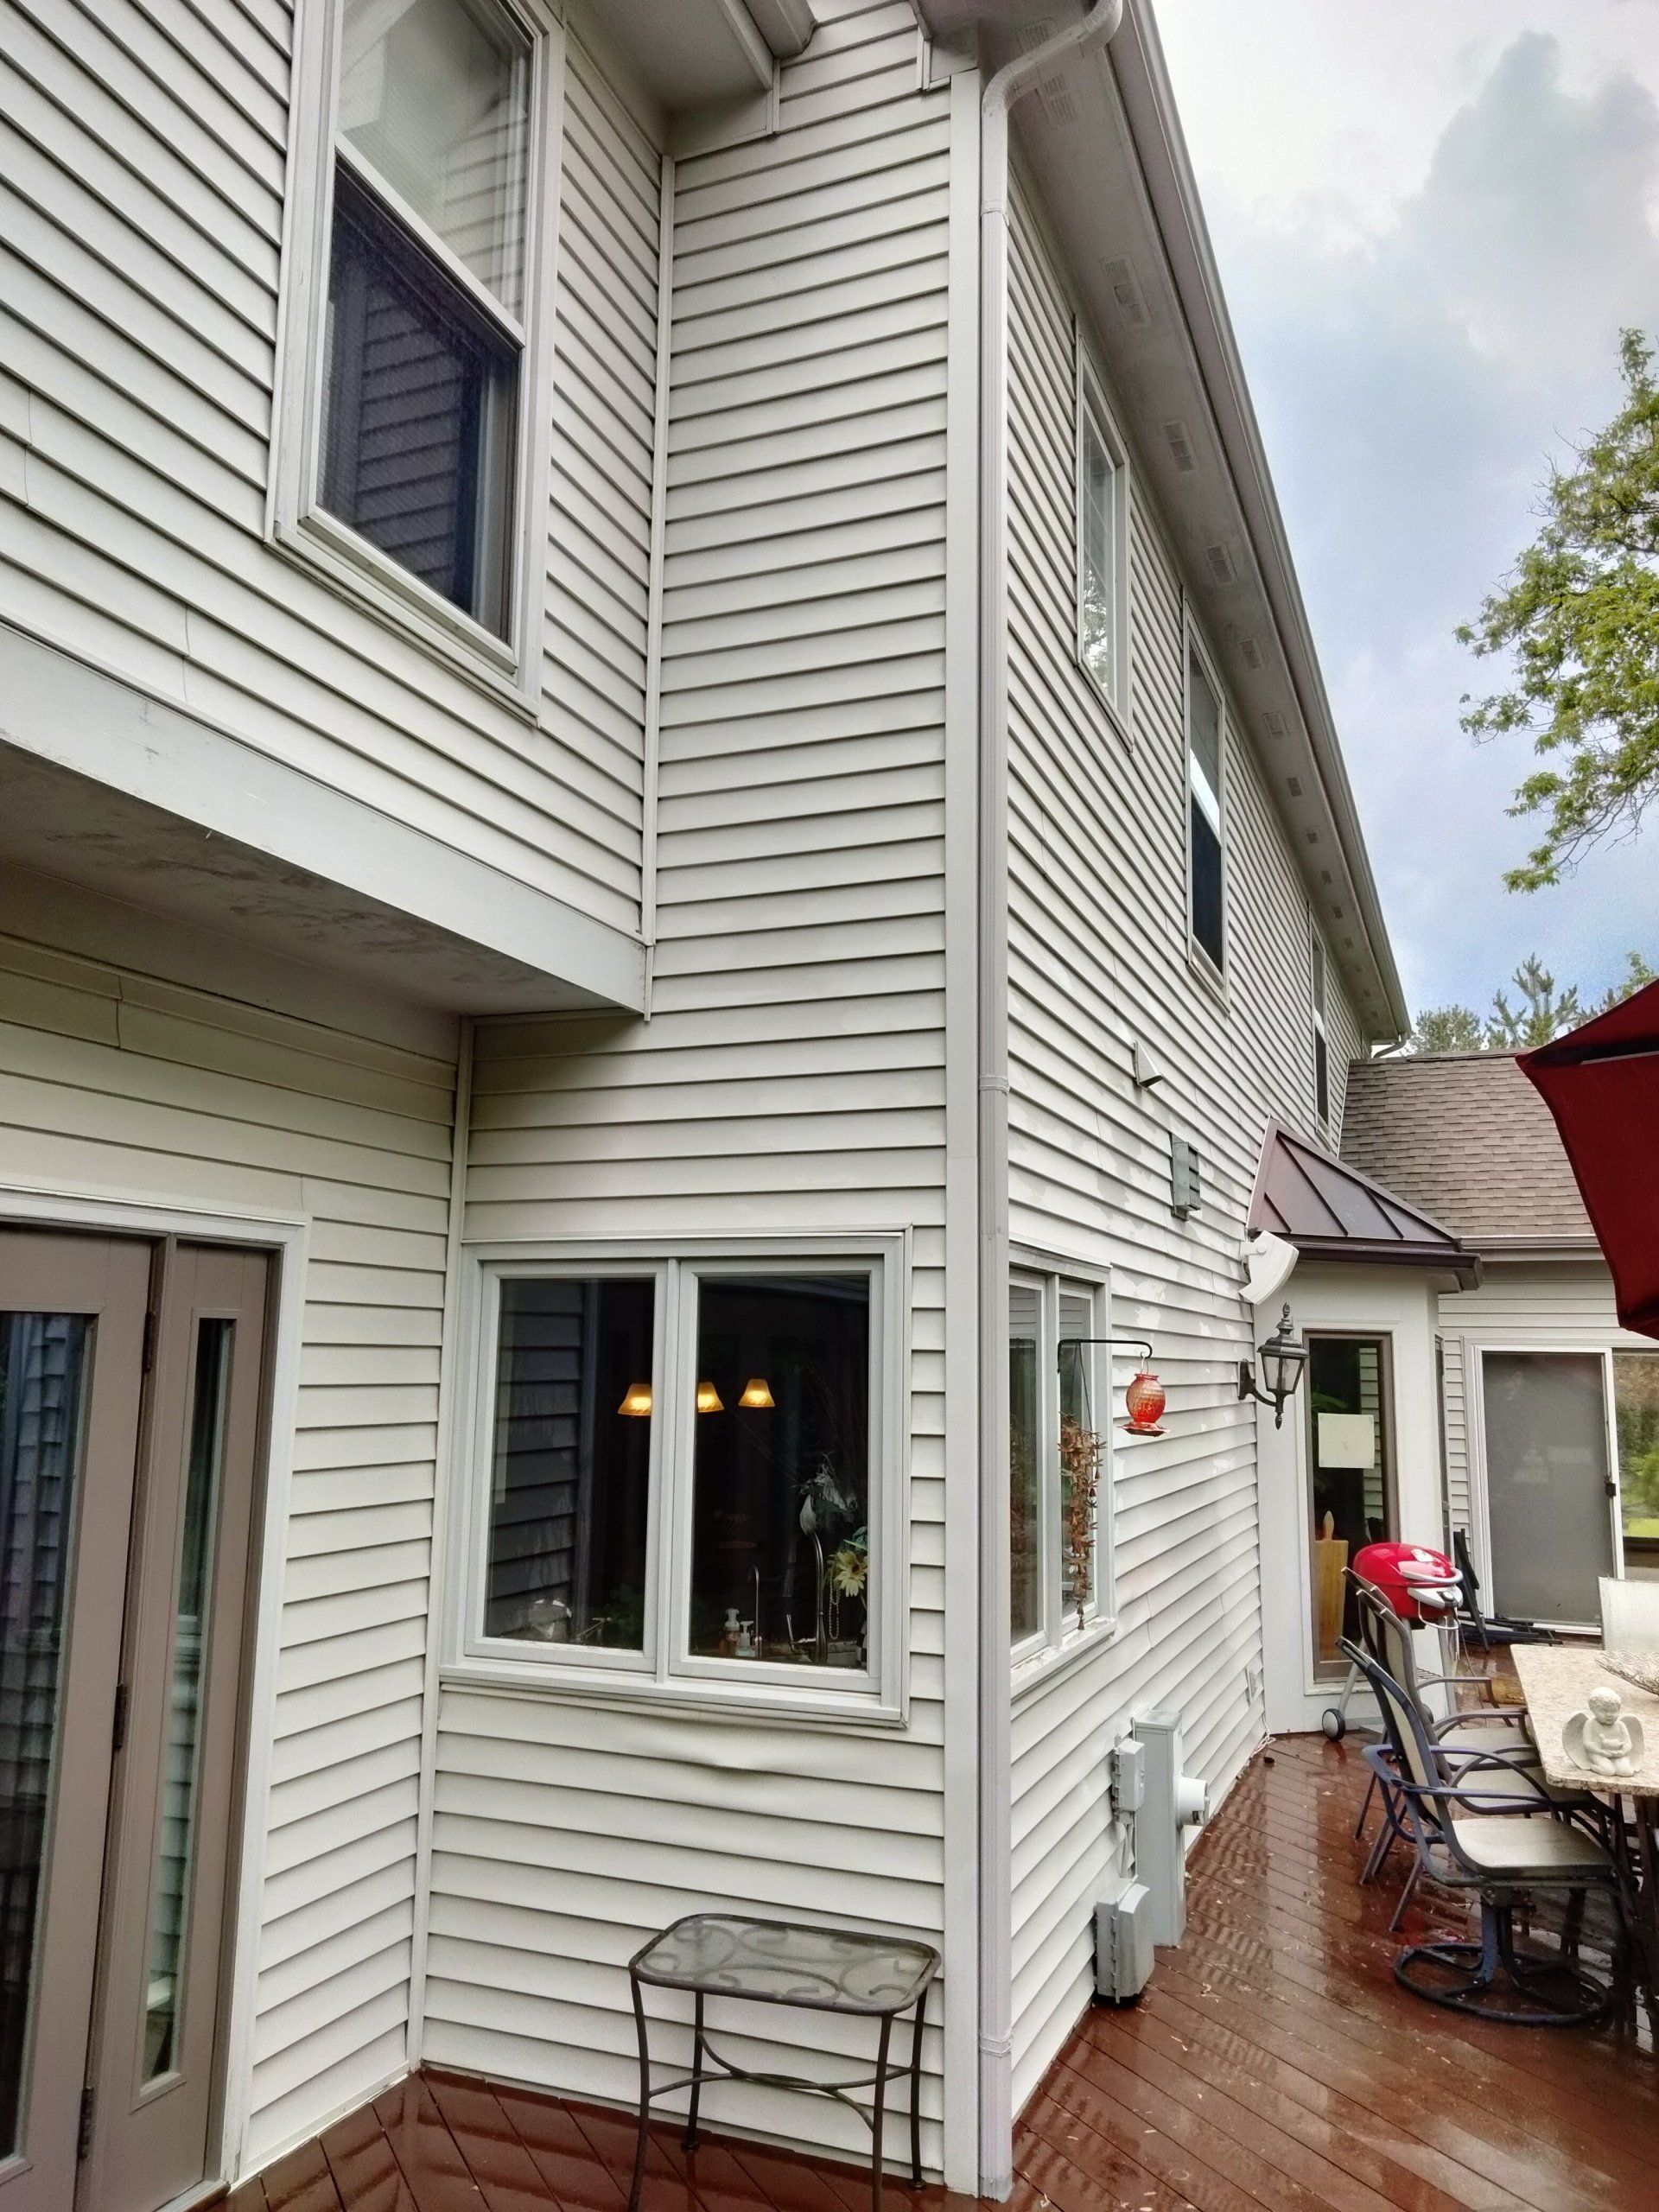 Cleaned exterior wood siding